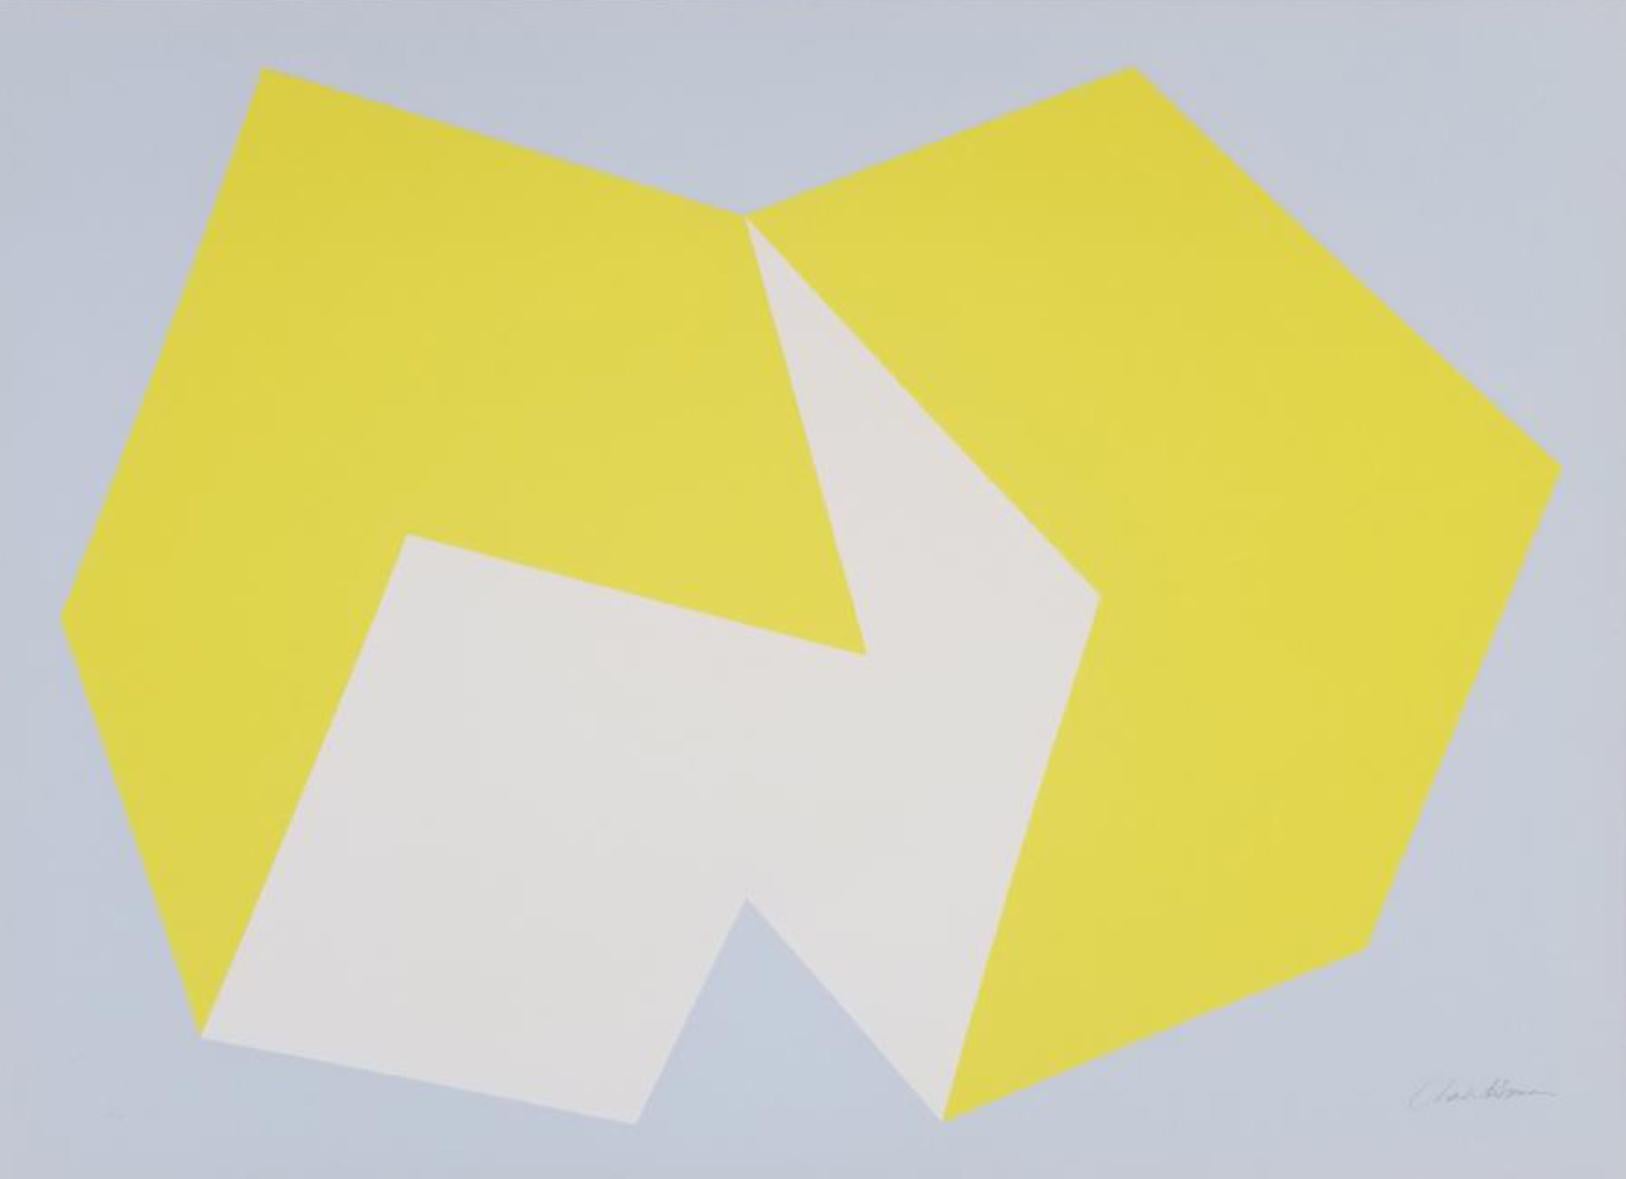 "This work was created with two separate entities that play against each other, in real and illusionary space, thus combining two separate realms that come together and play with one another.” -Charles Hinman

Lemon Yellow on Gray
Charles Hinman,